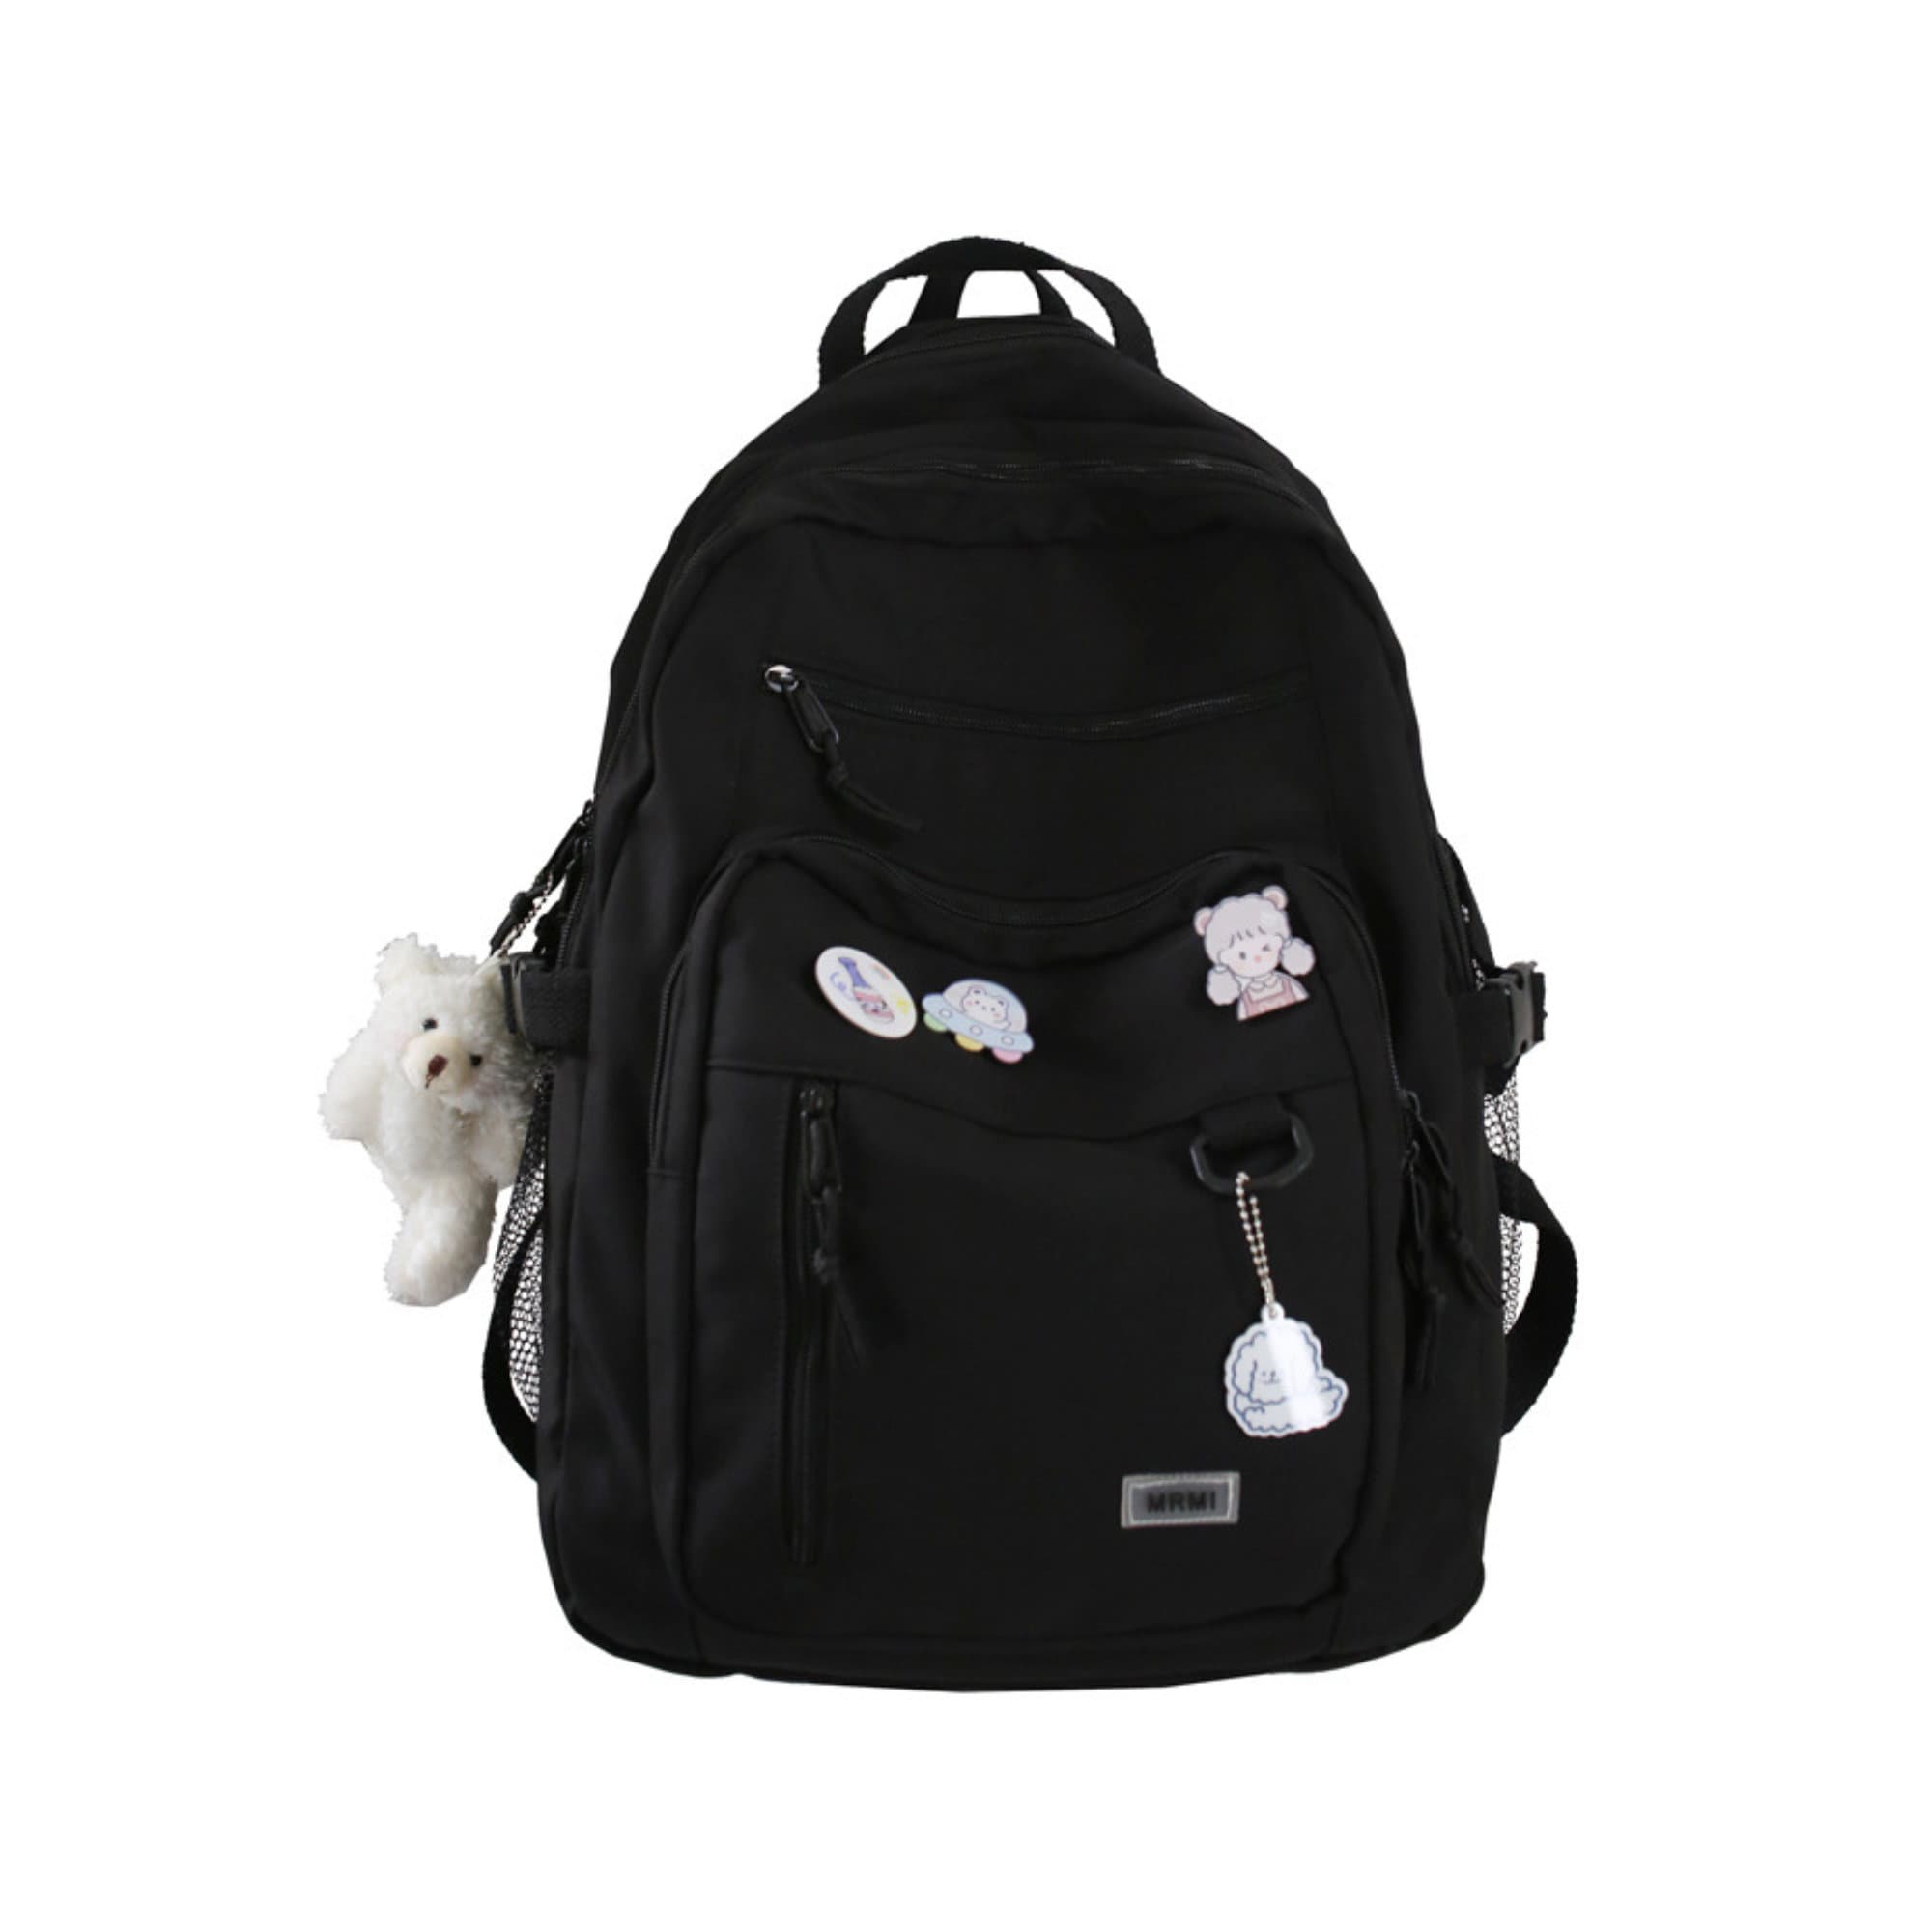 Leather College School Women's Cool backpacks V2S0407 School Bags